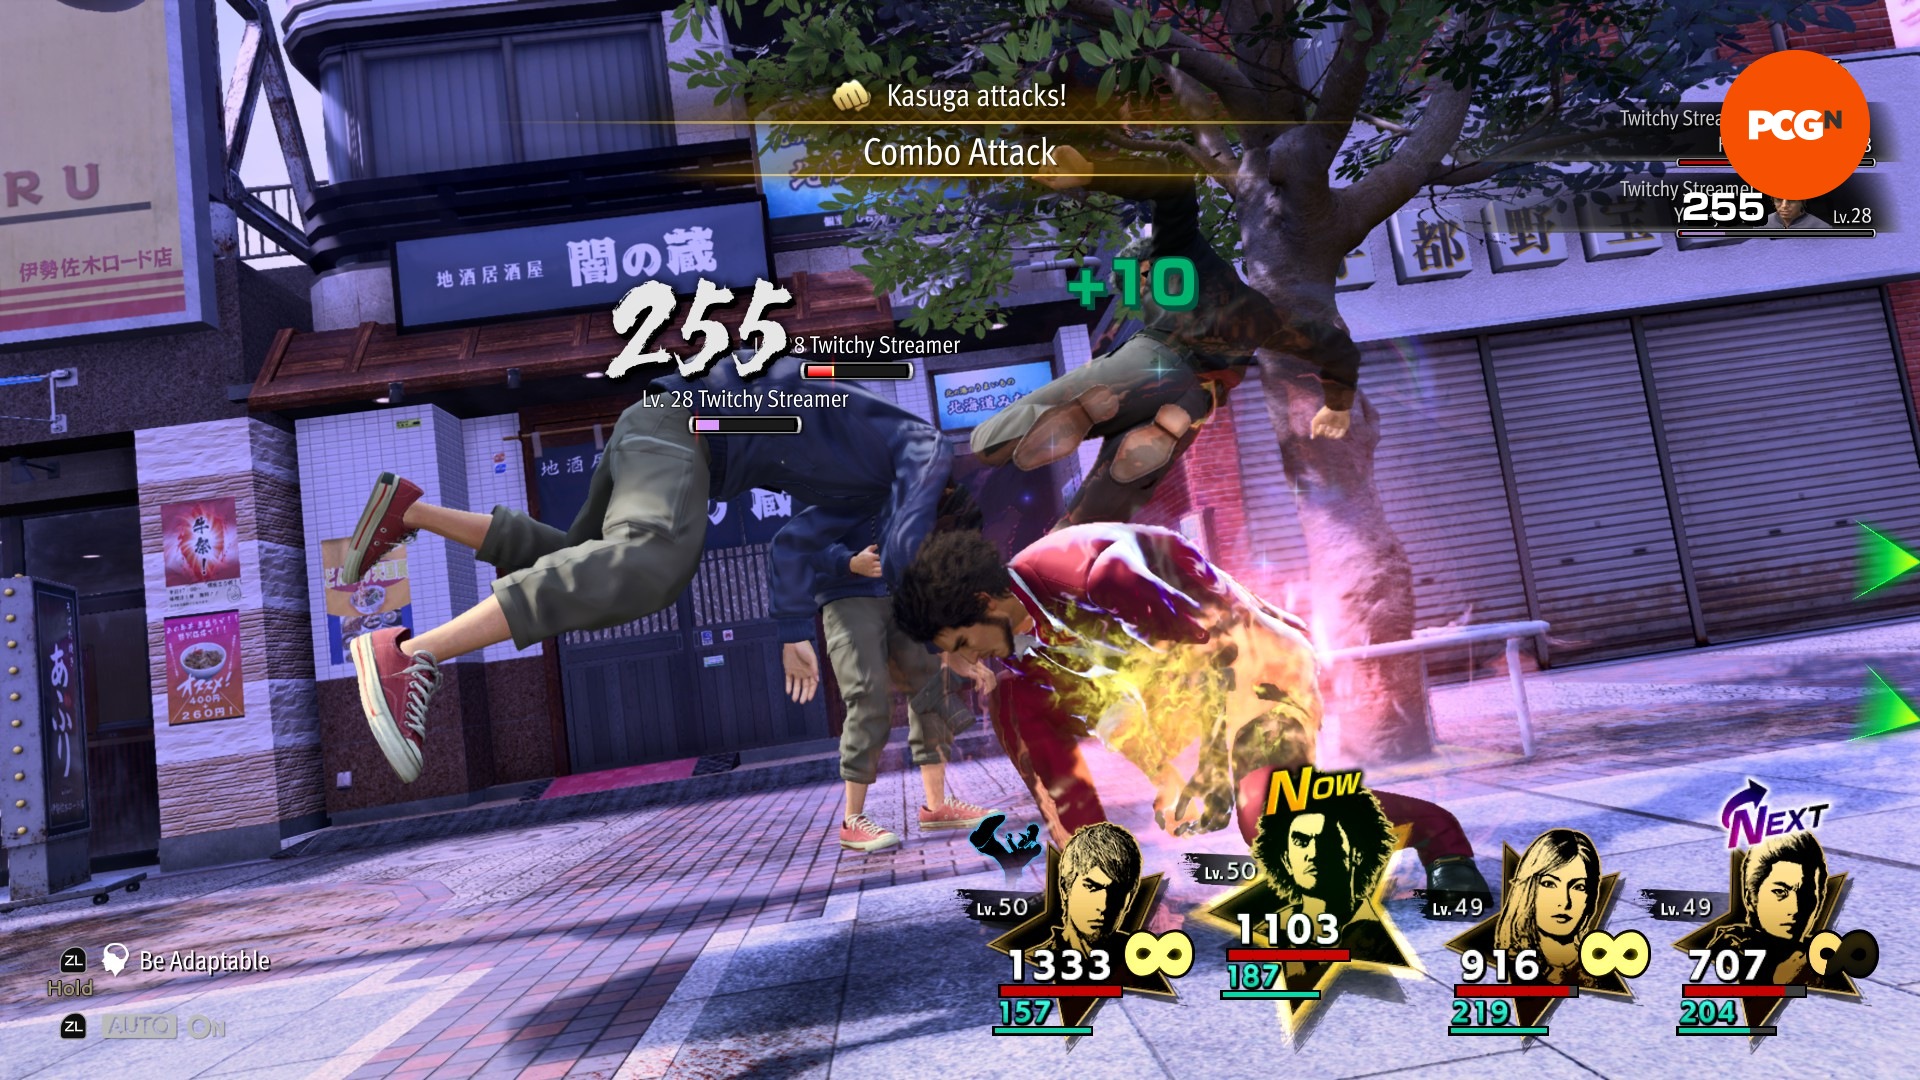 Ichiban and Kiryu team up for a Combo Attack, with Kiryu delivering a flying kick.]